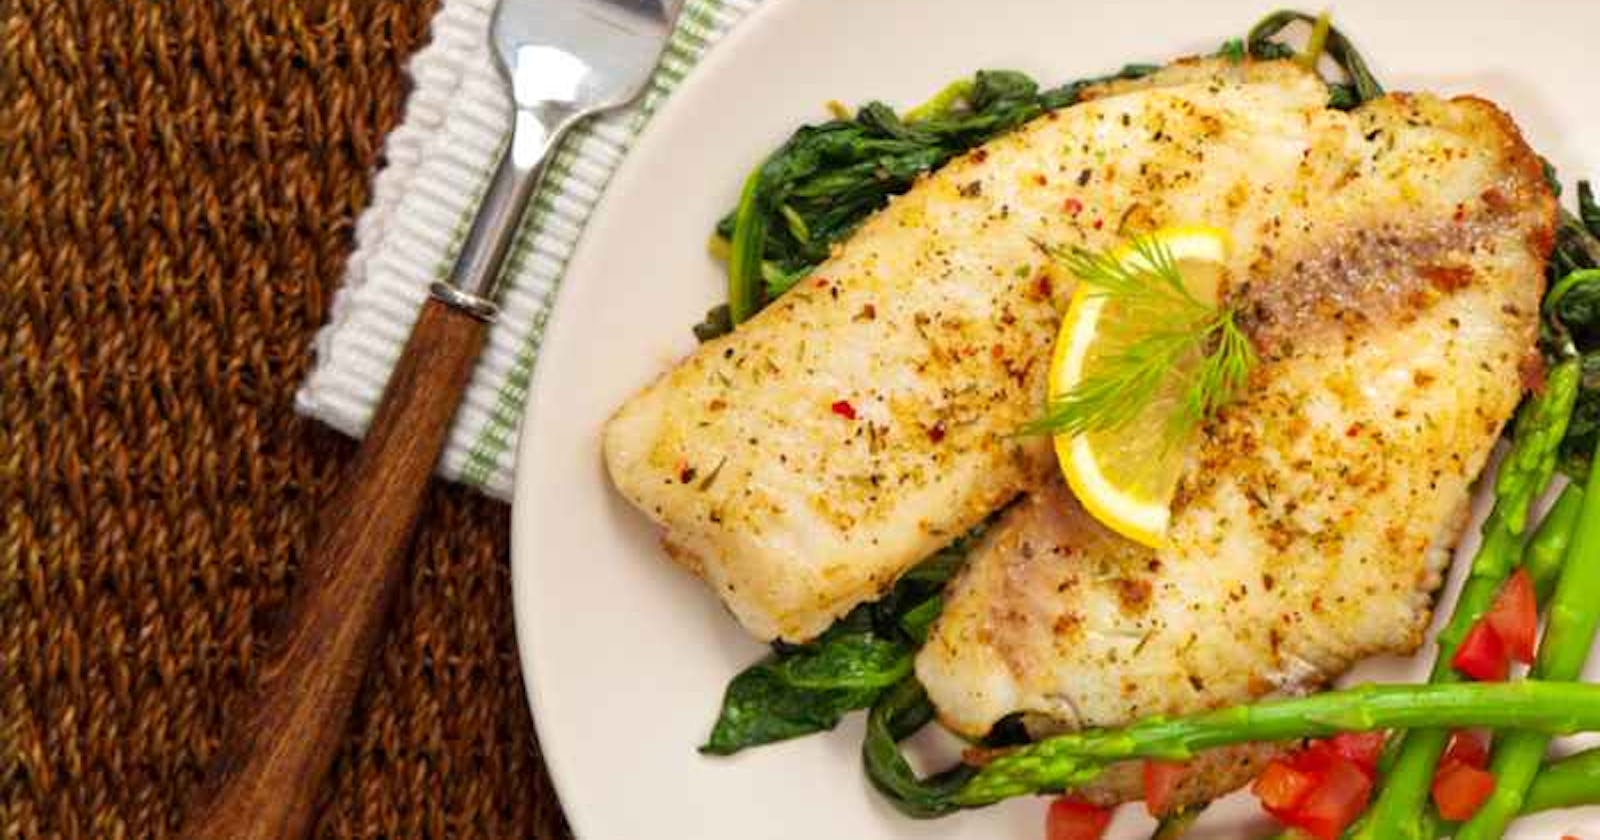 Making Healthy Fish Choices for Optimal Wellness